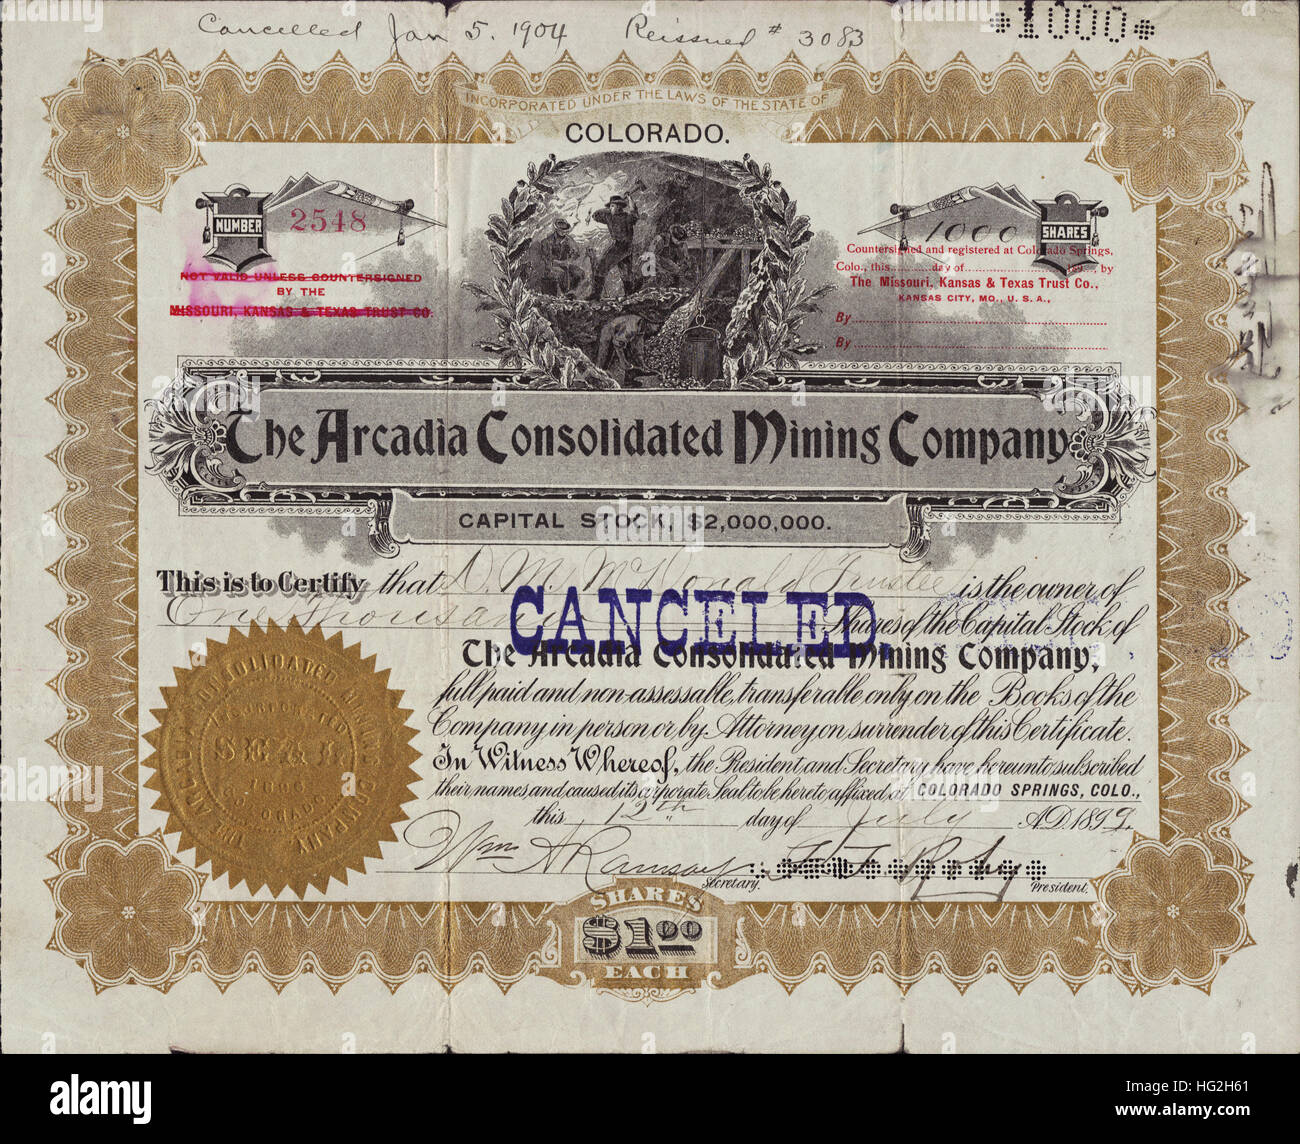 1899 Arcadia Consolidated Mining Company Stock Certificate - Gold Hill - Cripple Creek Mining District, Colorado - USA Stock Photo